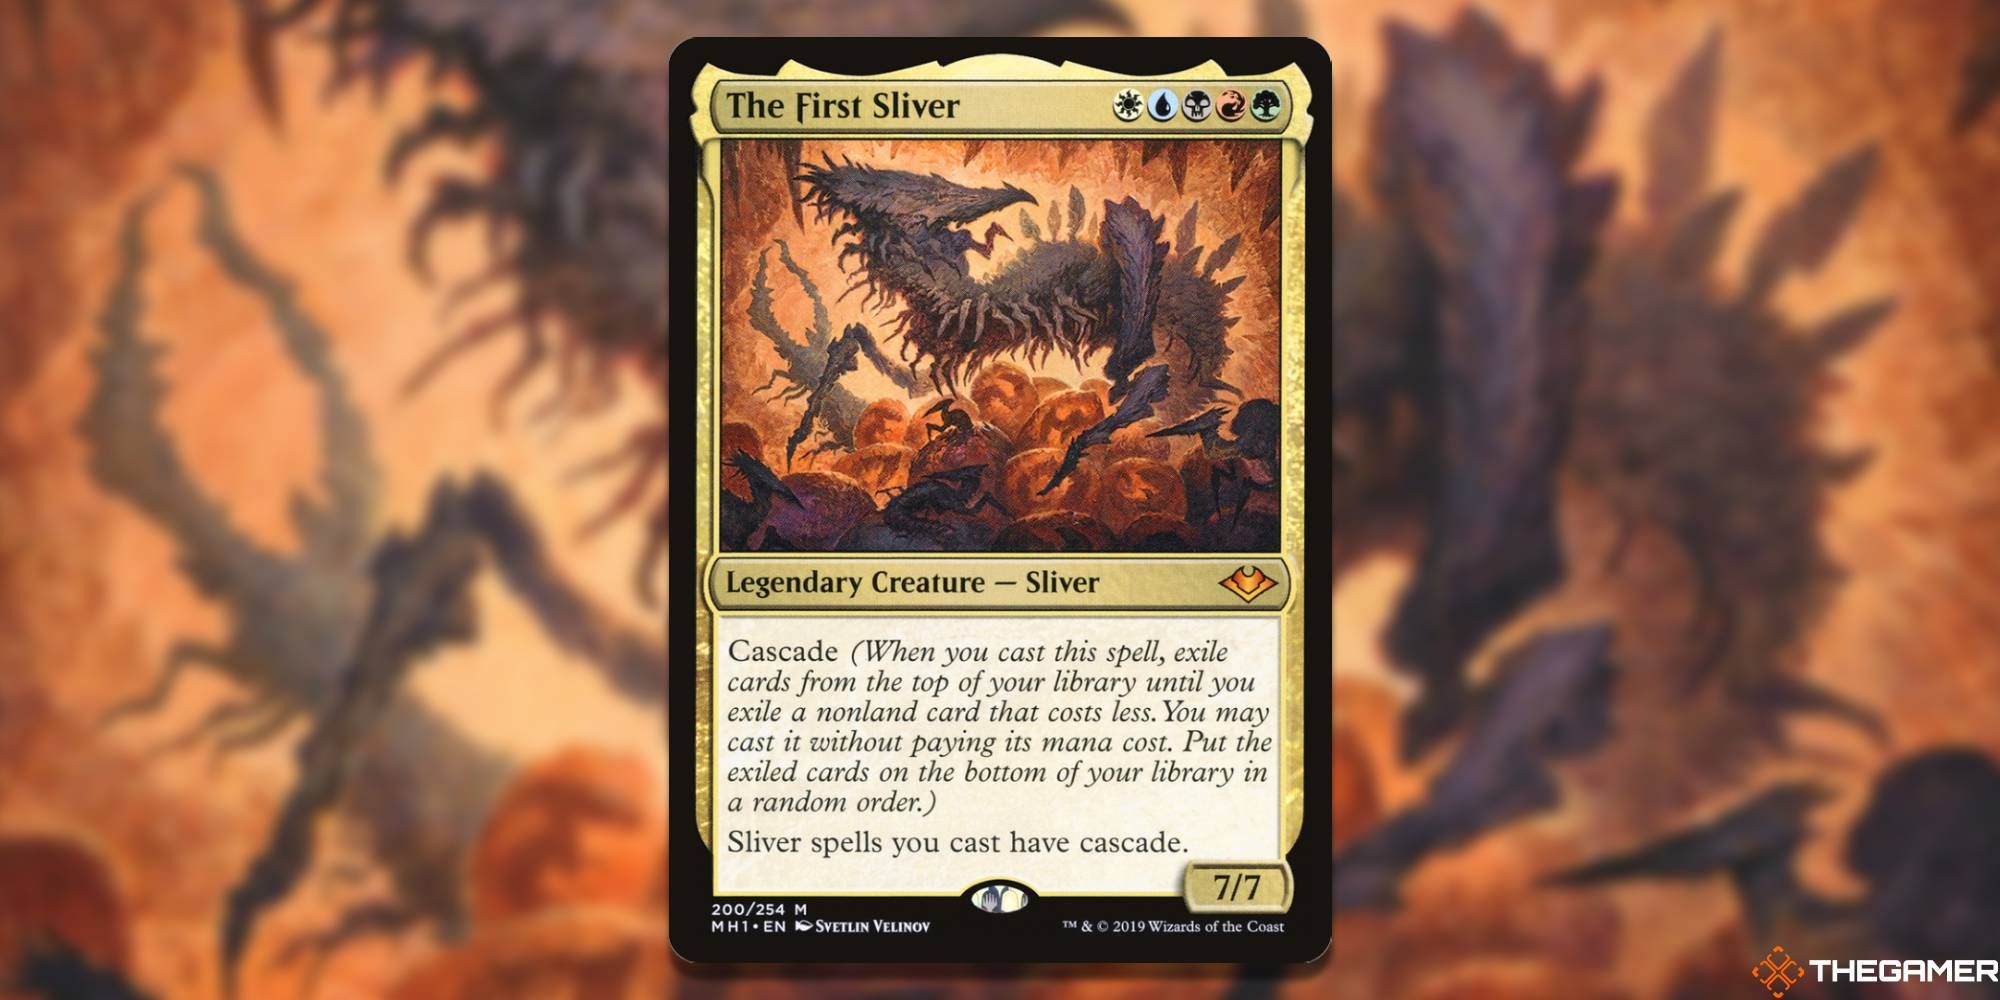 The First Sliver card and artwork in Magic: The Gathering.